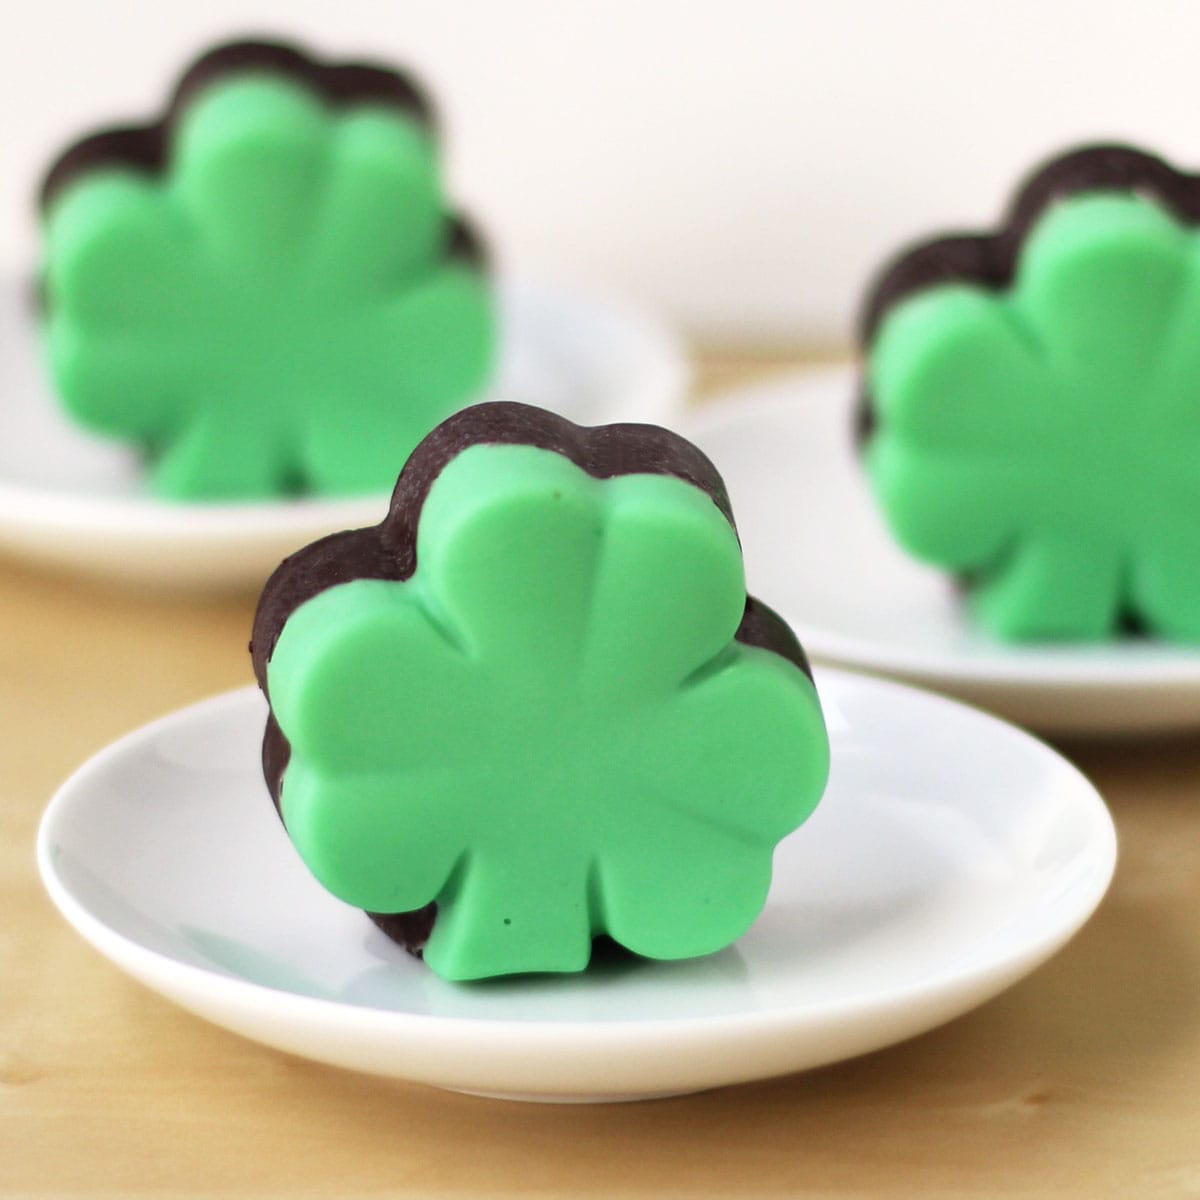 fudge shamrocks with a layer of chocolate fudge and a layer of green creme de menthe fudge.